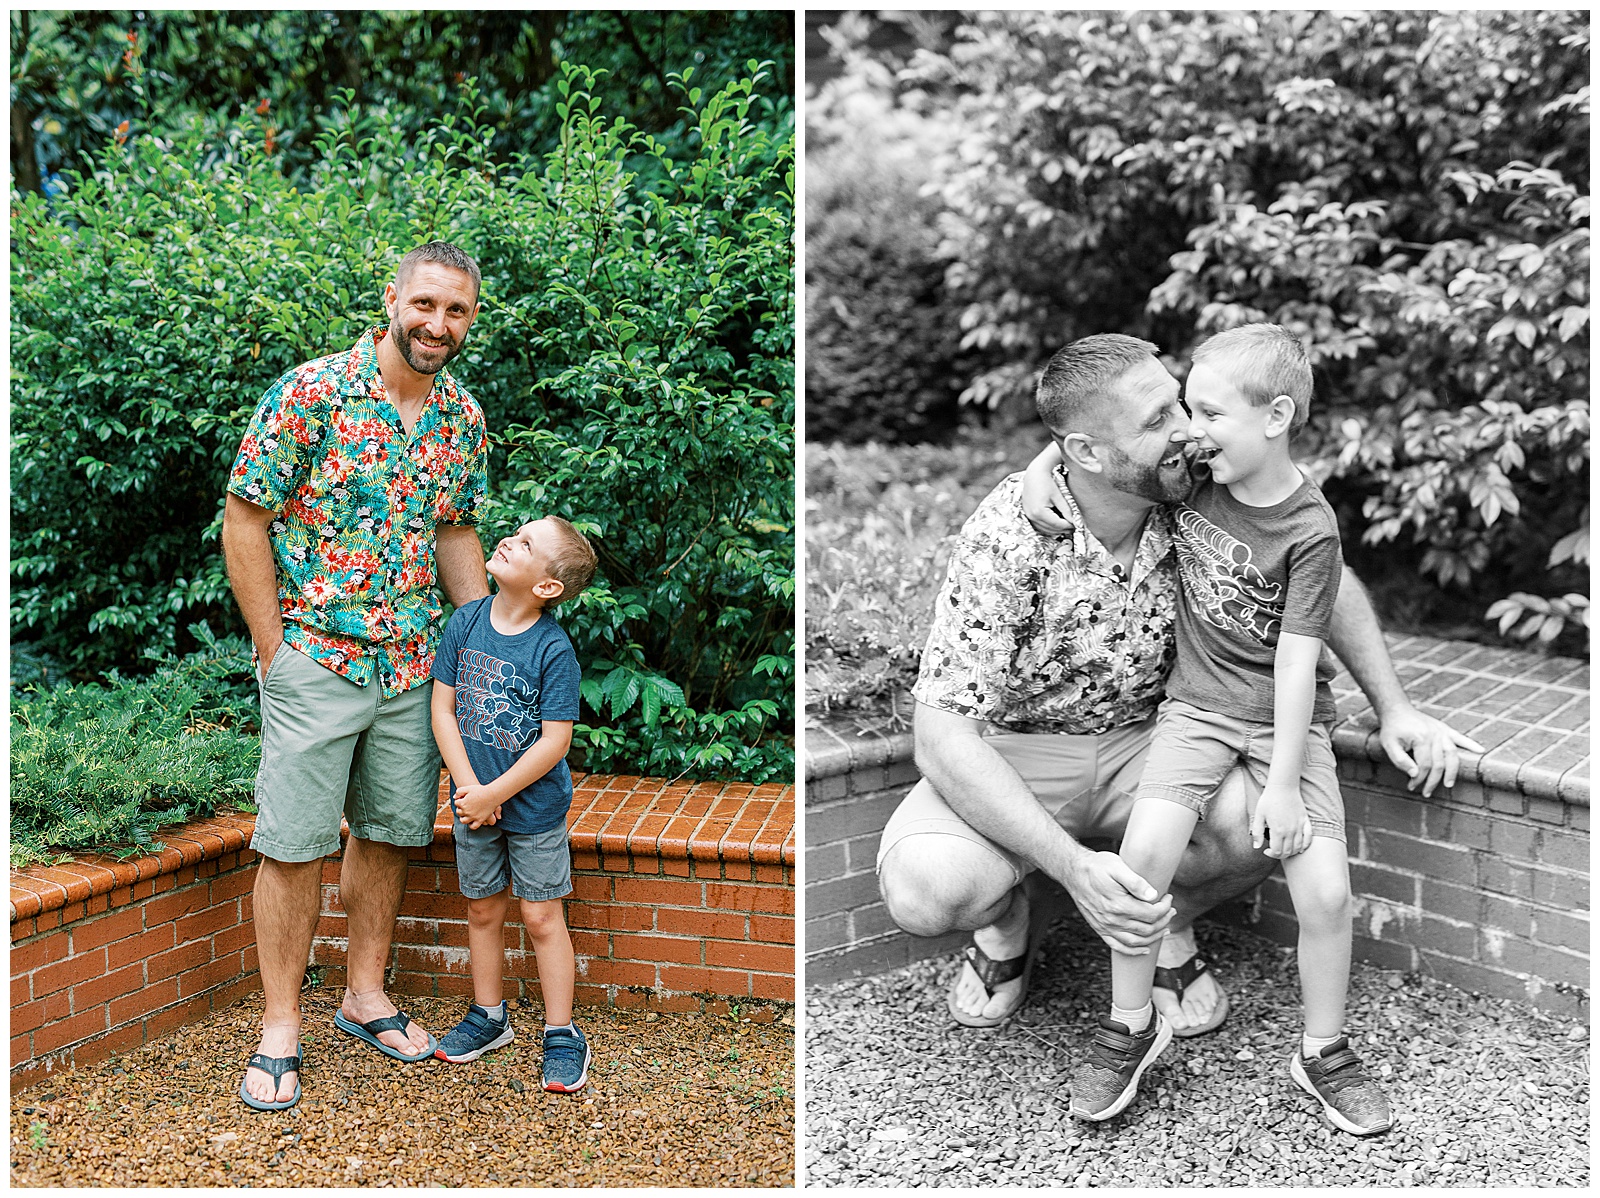 Disney T-shirt Outfit for Family Photoshoot at Duke Mansion Gardens in North Carolina Engagement Session